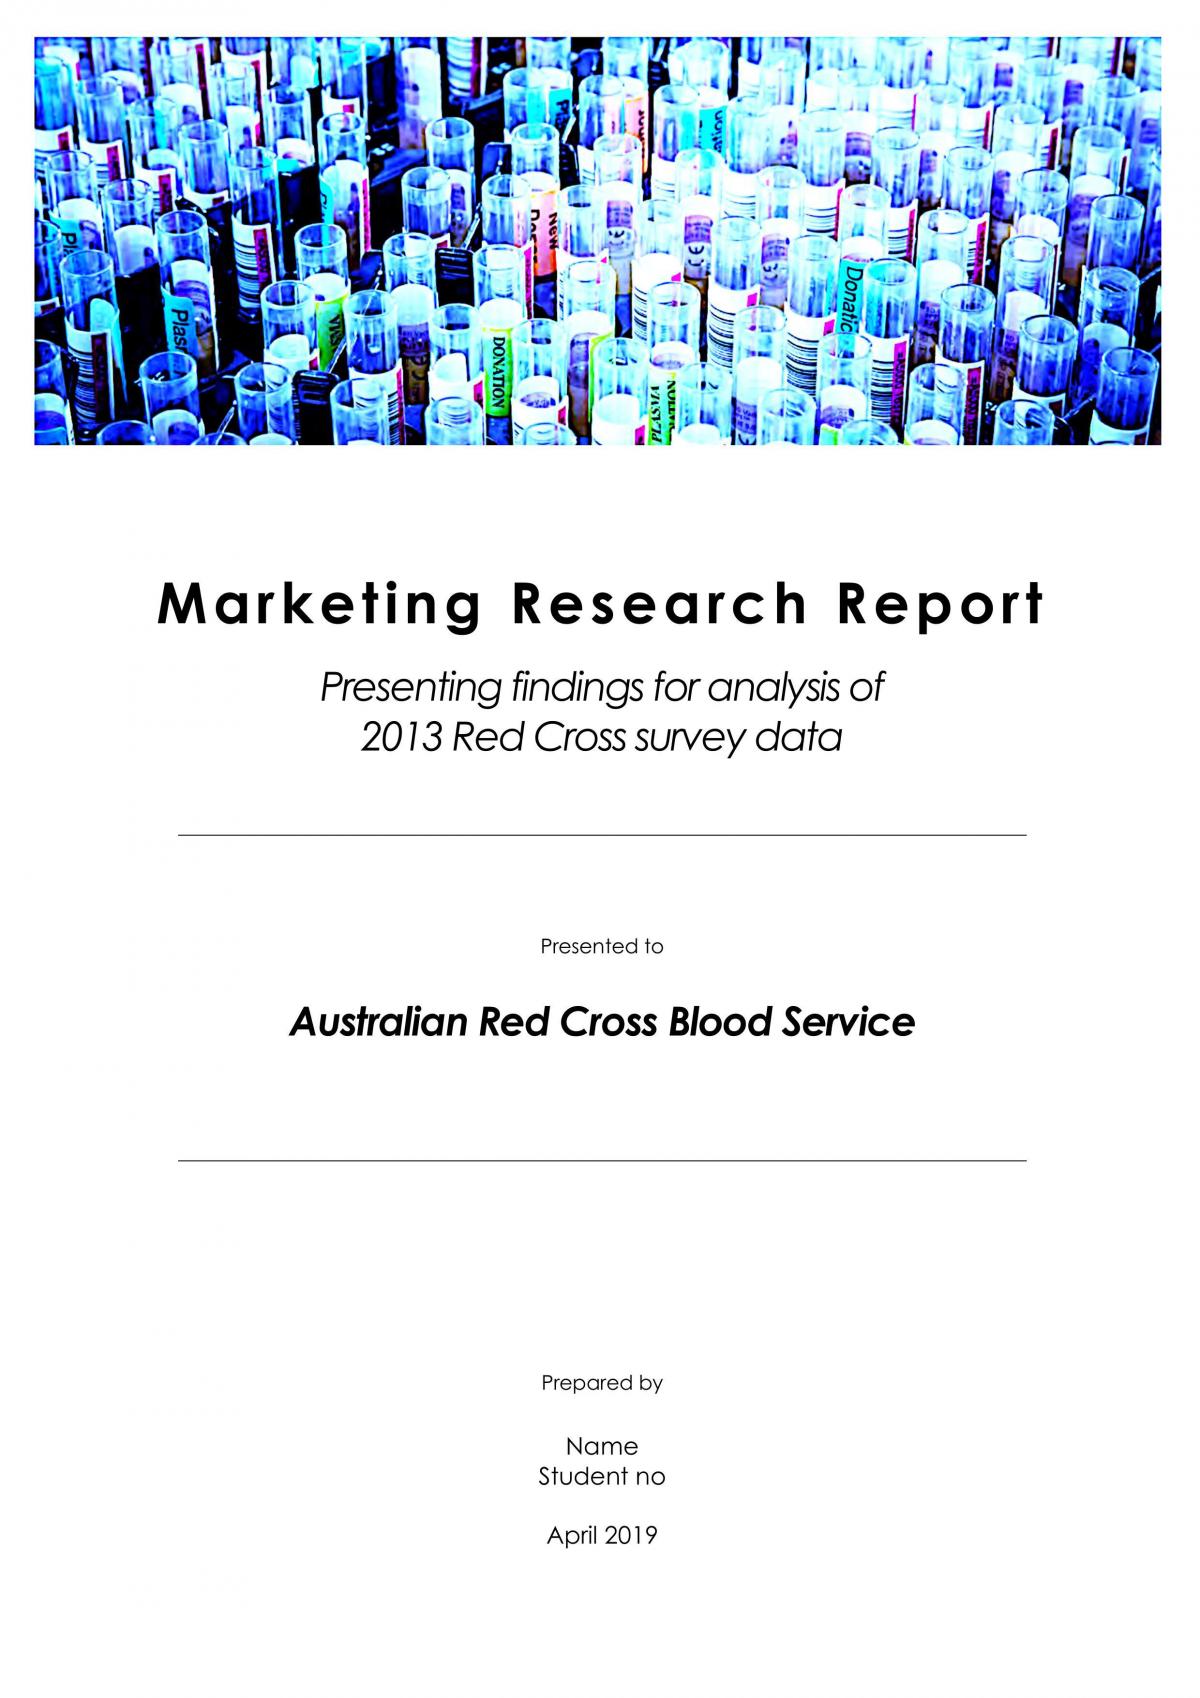 Marketing Research Report - Australian Red Cross Blood Service - Page 1